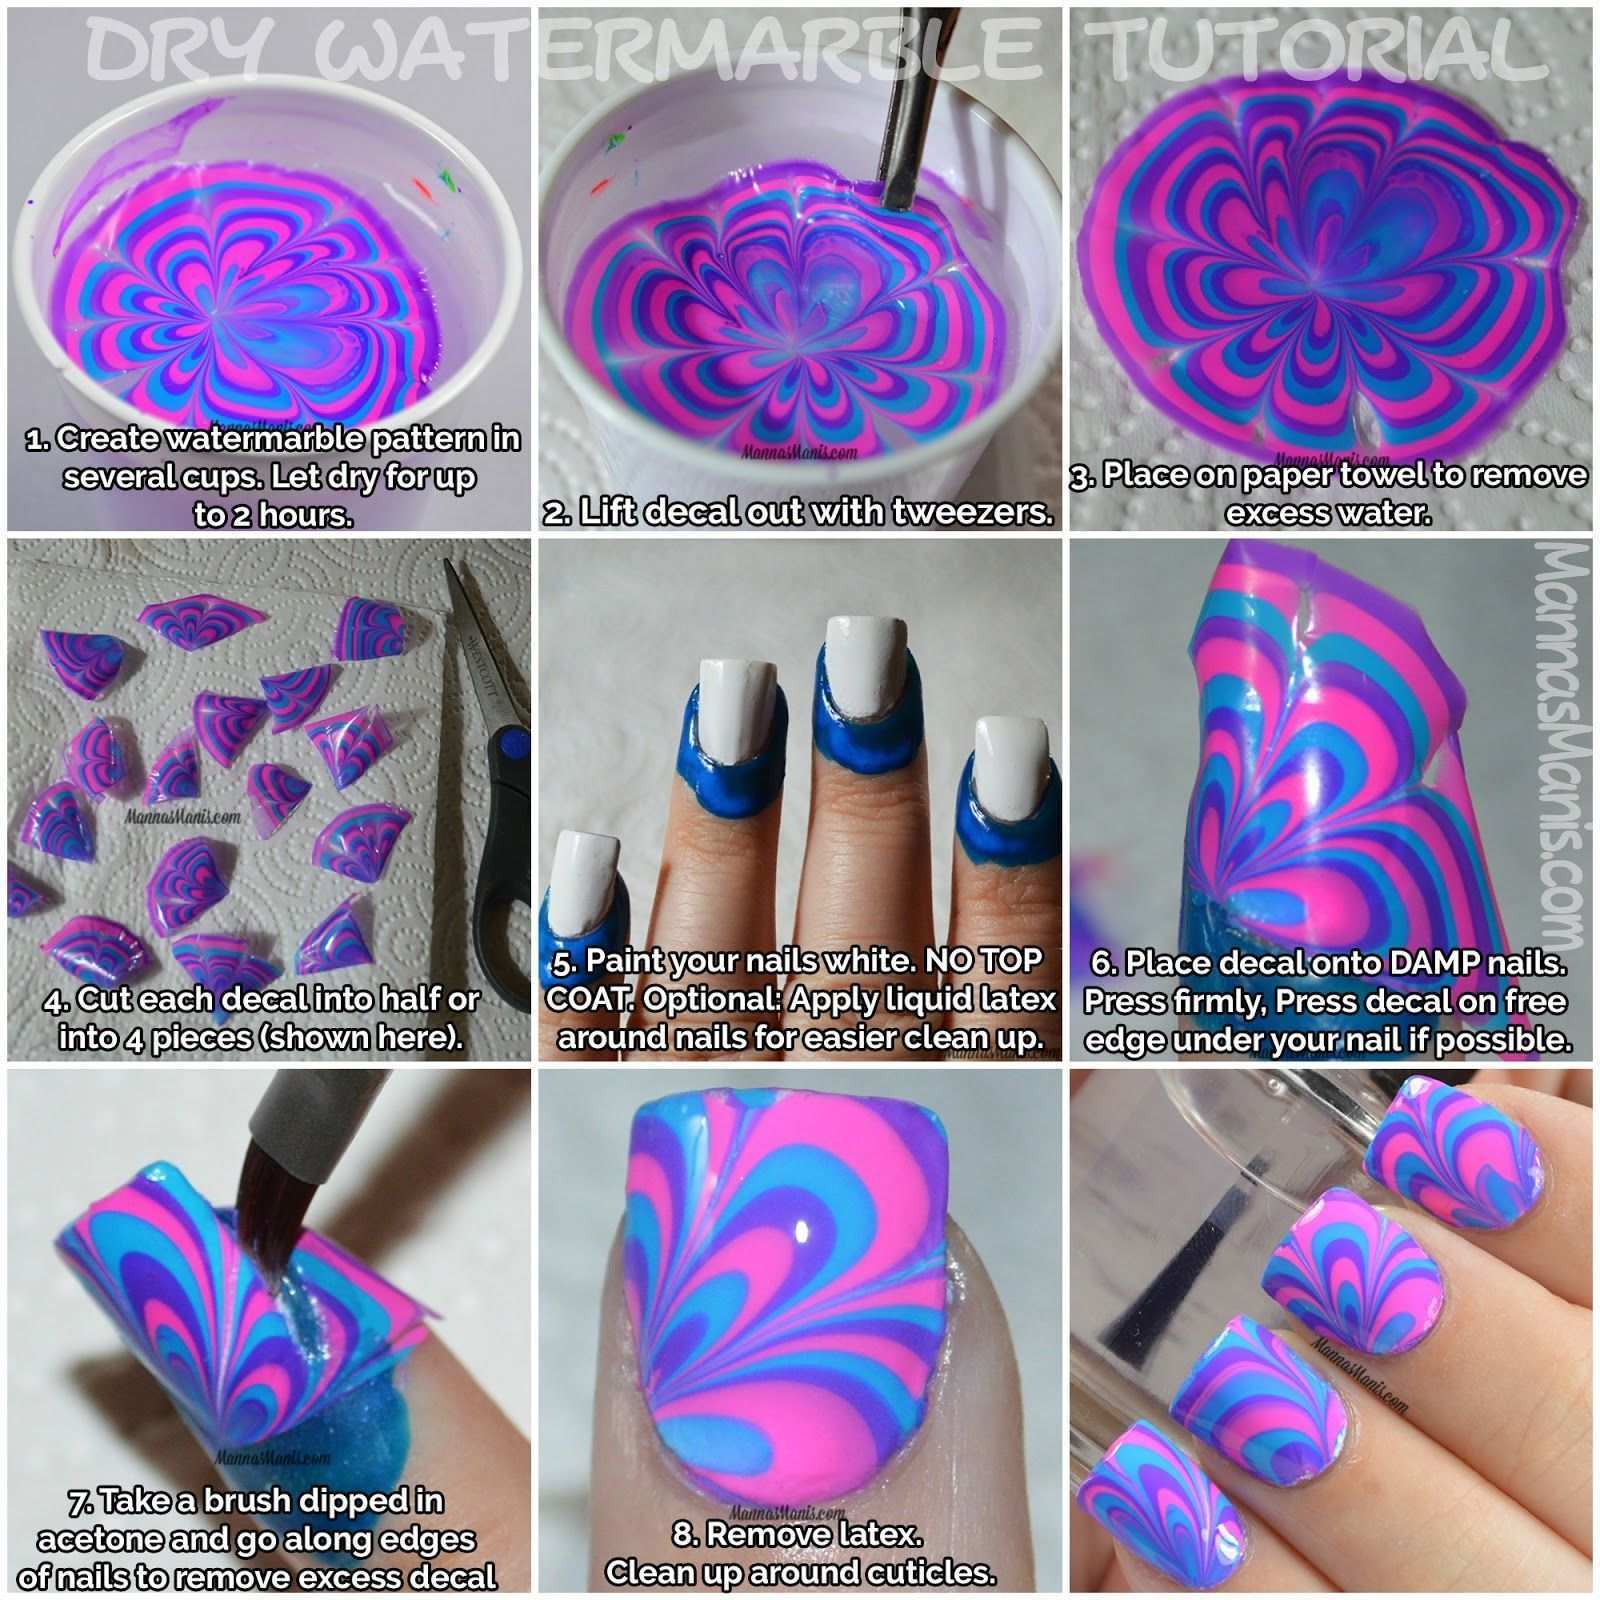 No Mess Dry Watermarble Tutorial By Manna S Manis Nailartgalleries Nail Art Galleries Nail Art Nail Art Designs Nail Art Tutorial